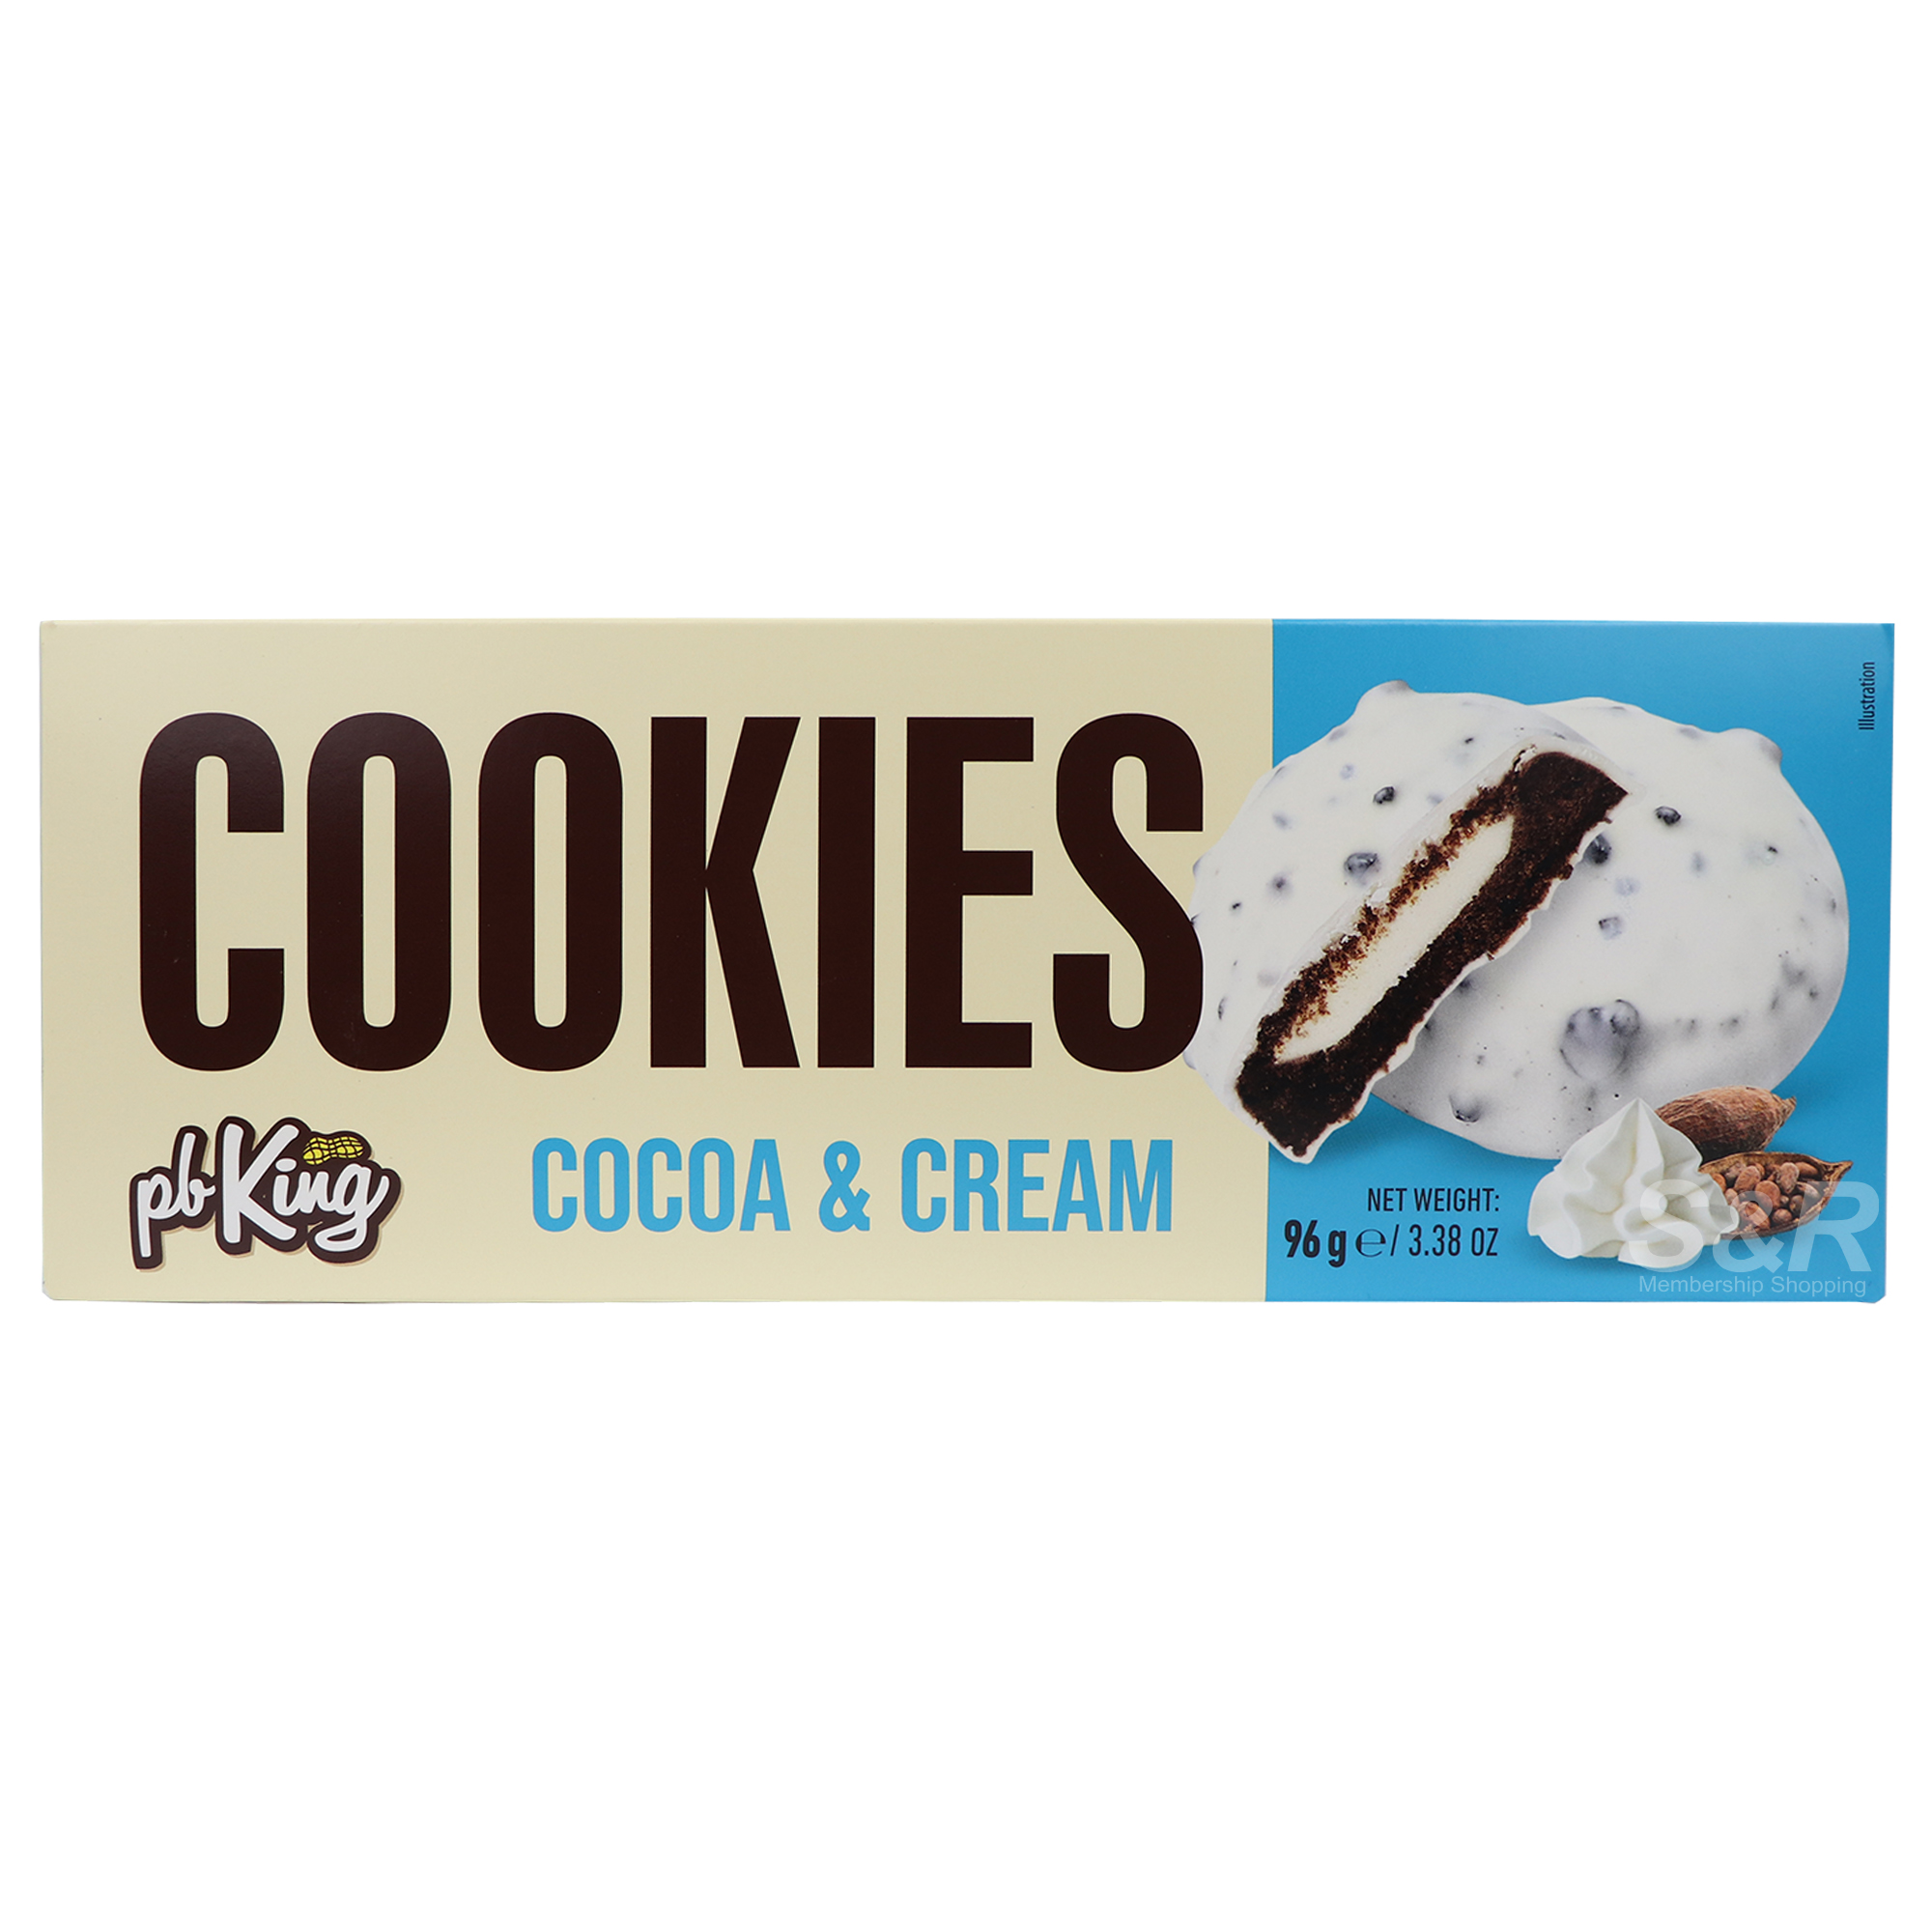 PB King Cookies Cocoa and Cream 96g